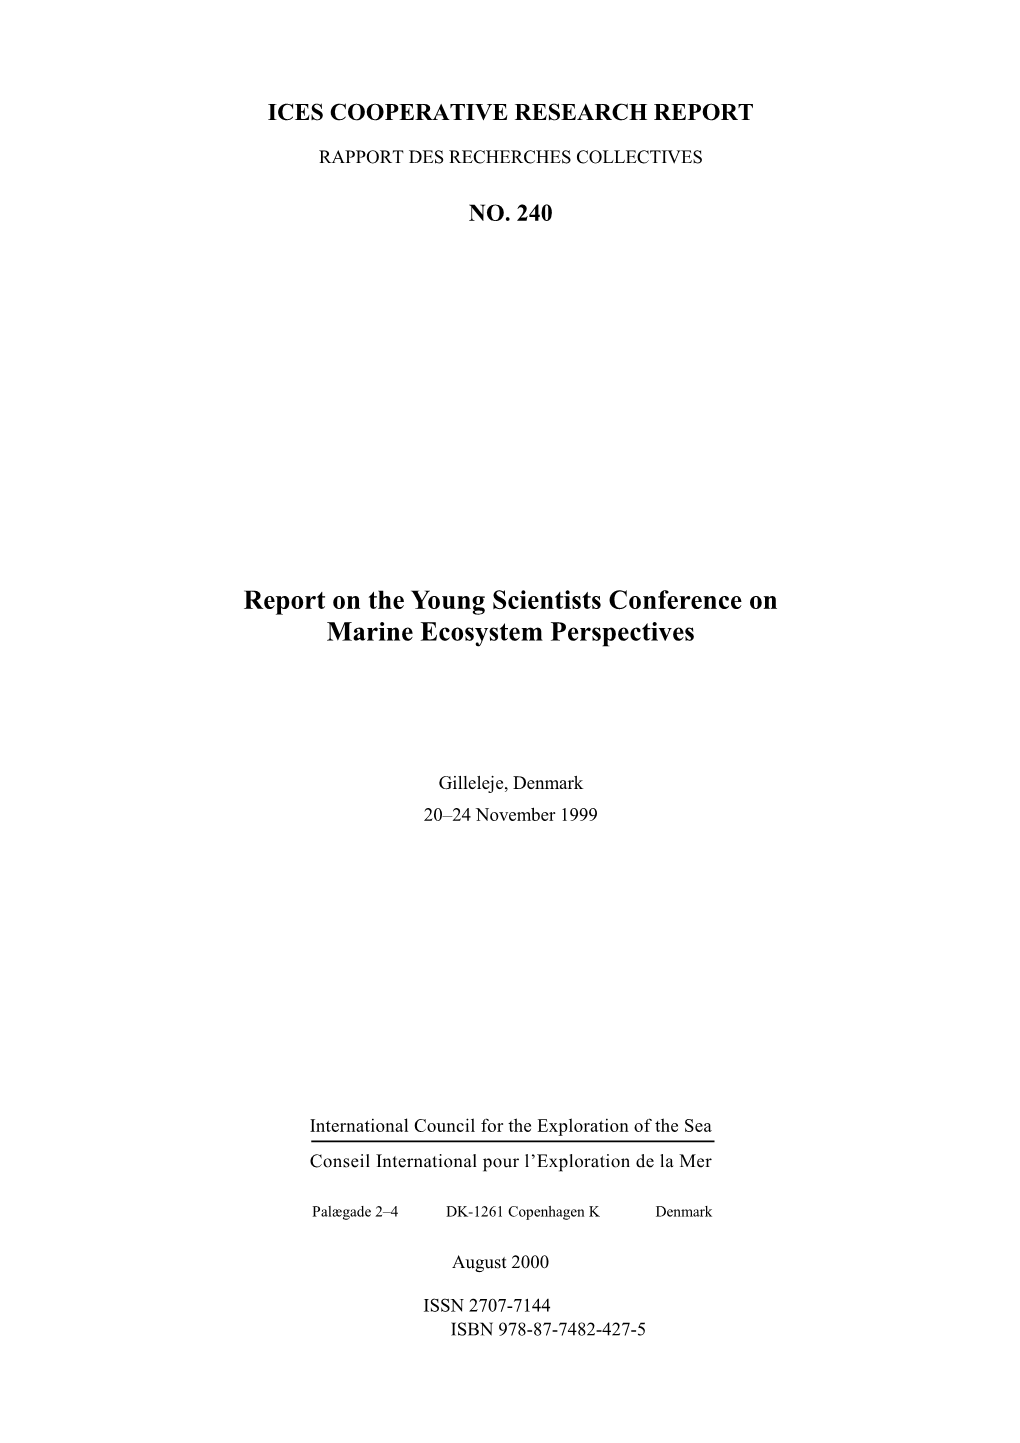 Report on the Young Scientists Conference on Marine Ecosystem Perspectives